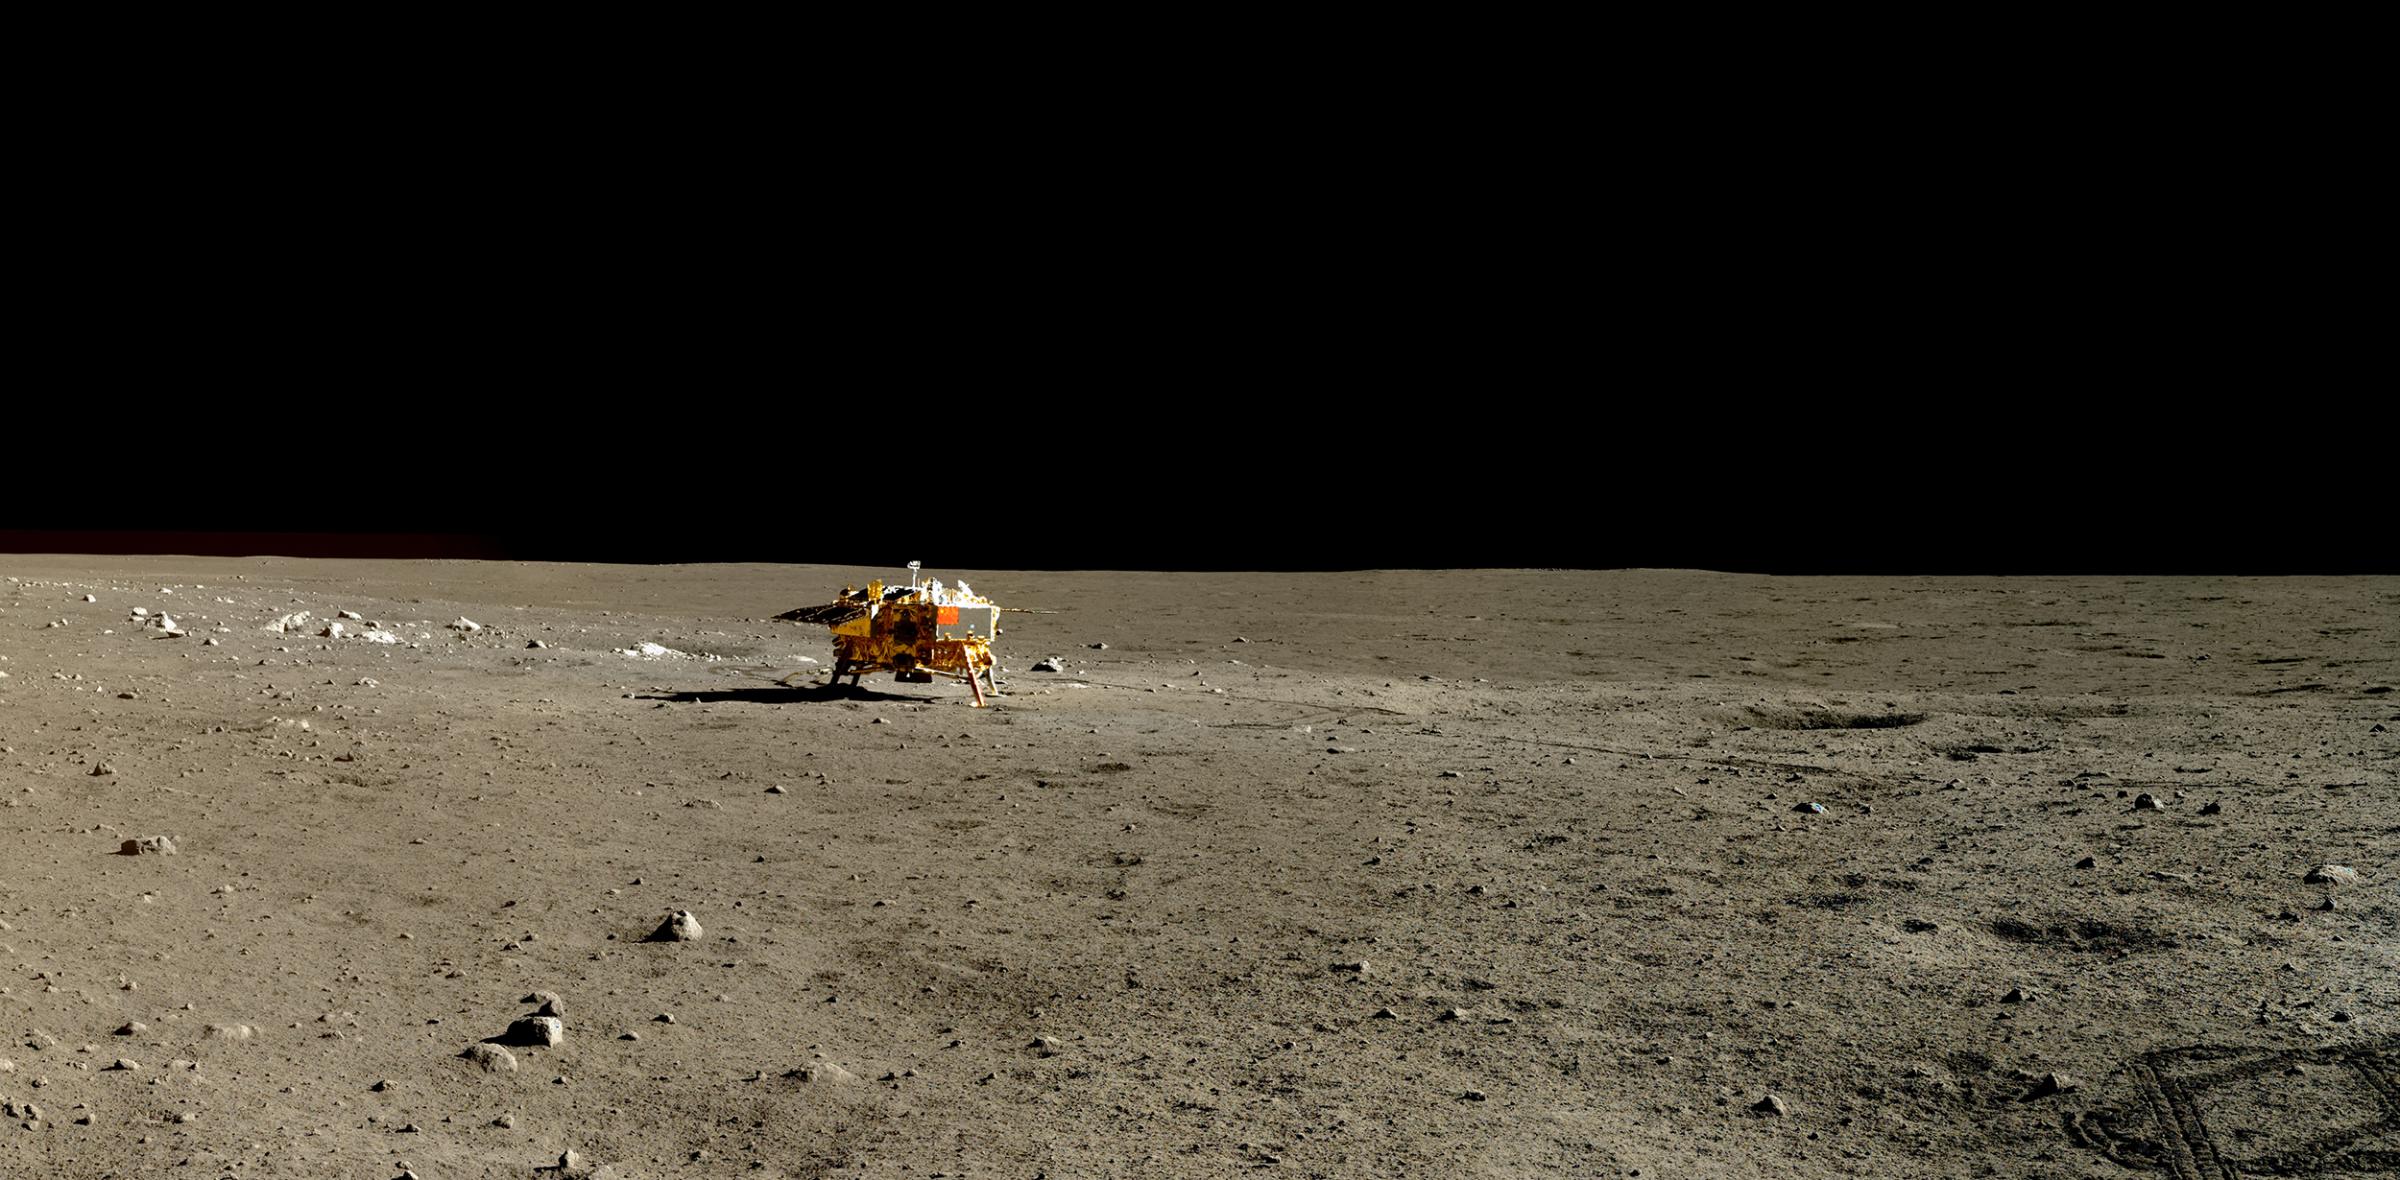 The Yutu rover took the images for this panorama on Jan. 13, 2014, during the rover's second lunar day on the surface, while close to "Pyramid Rock."